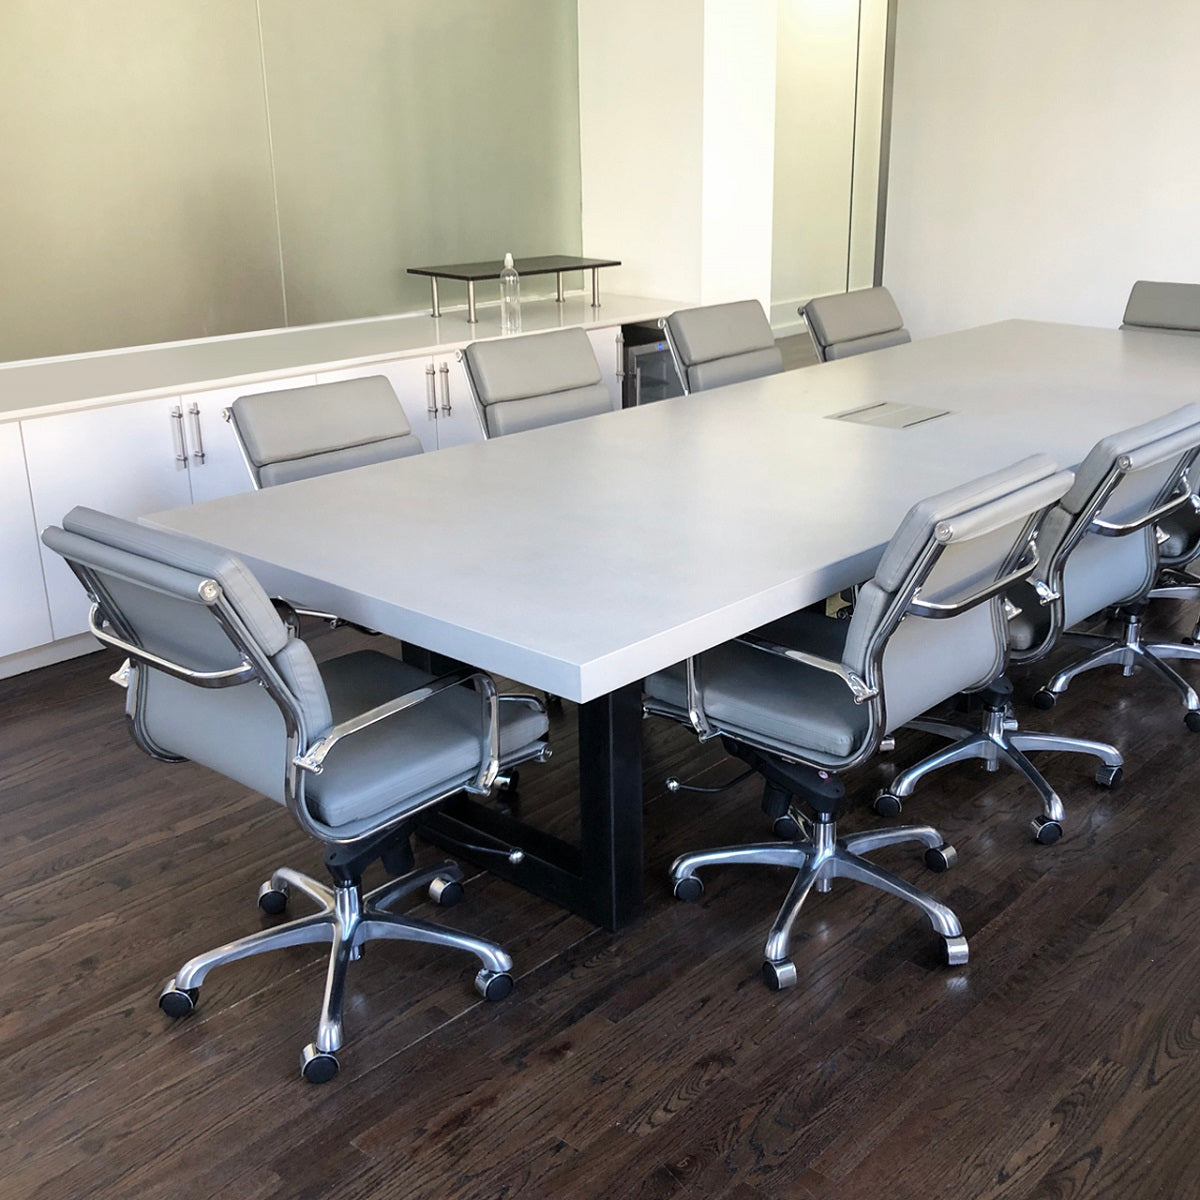 Conference room with long gray concrete table.